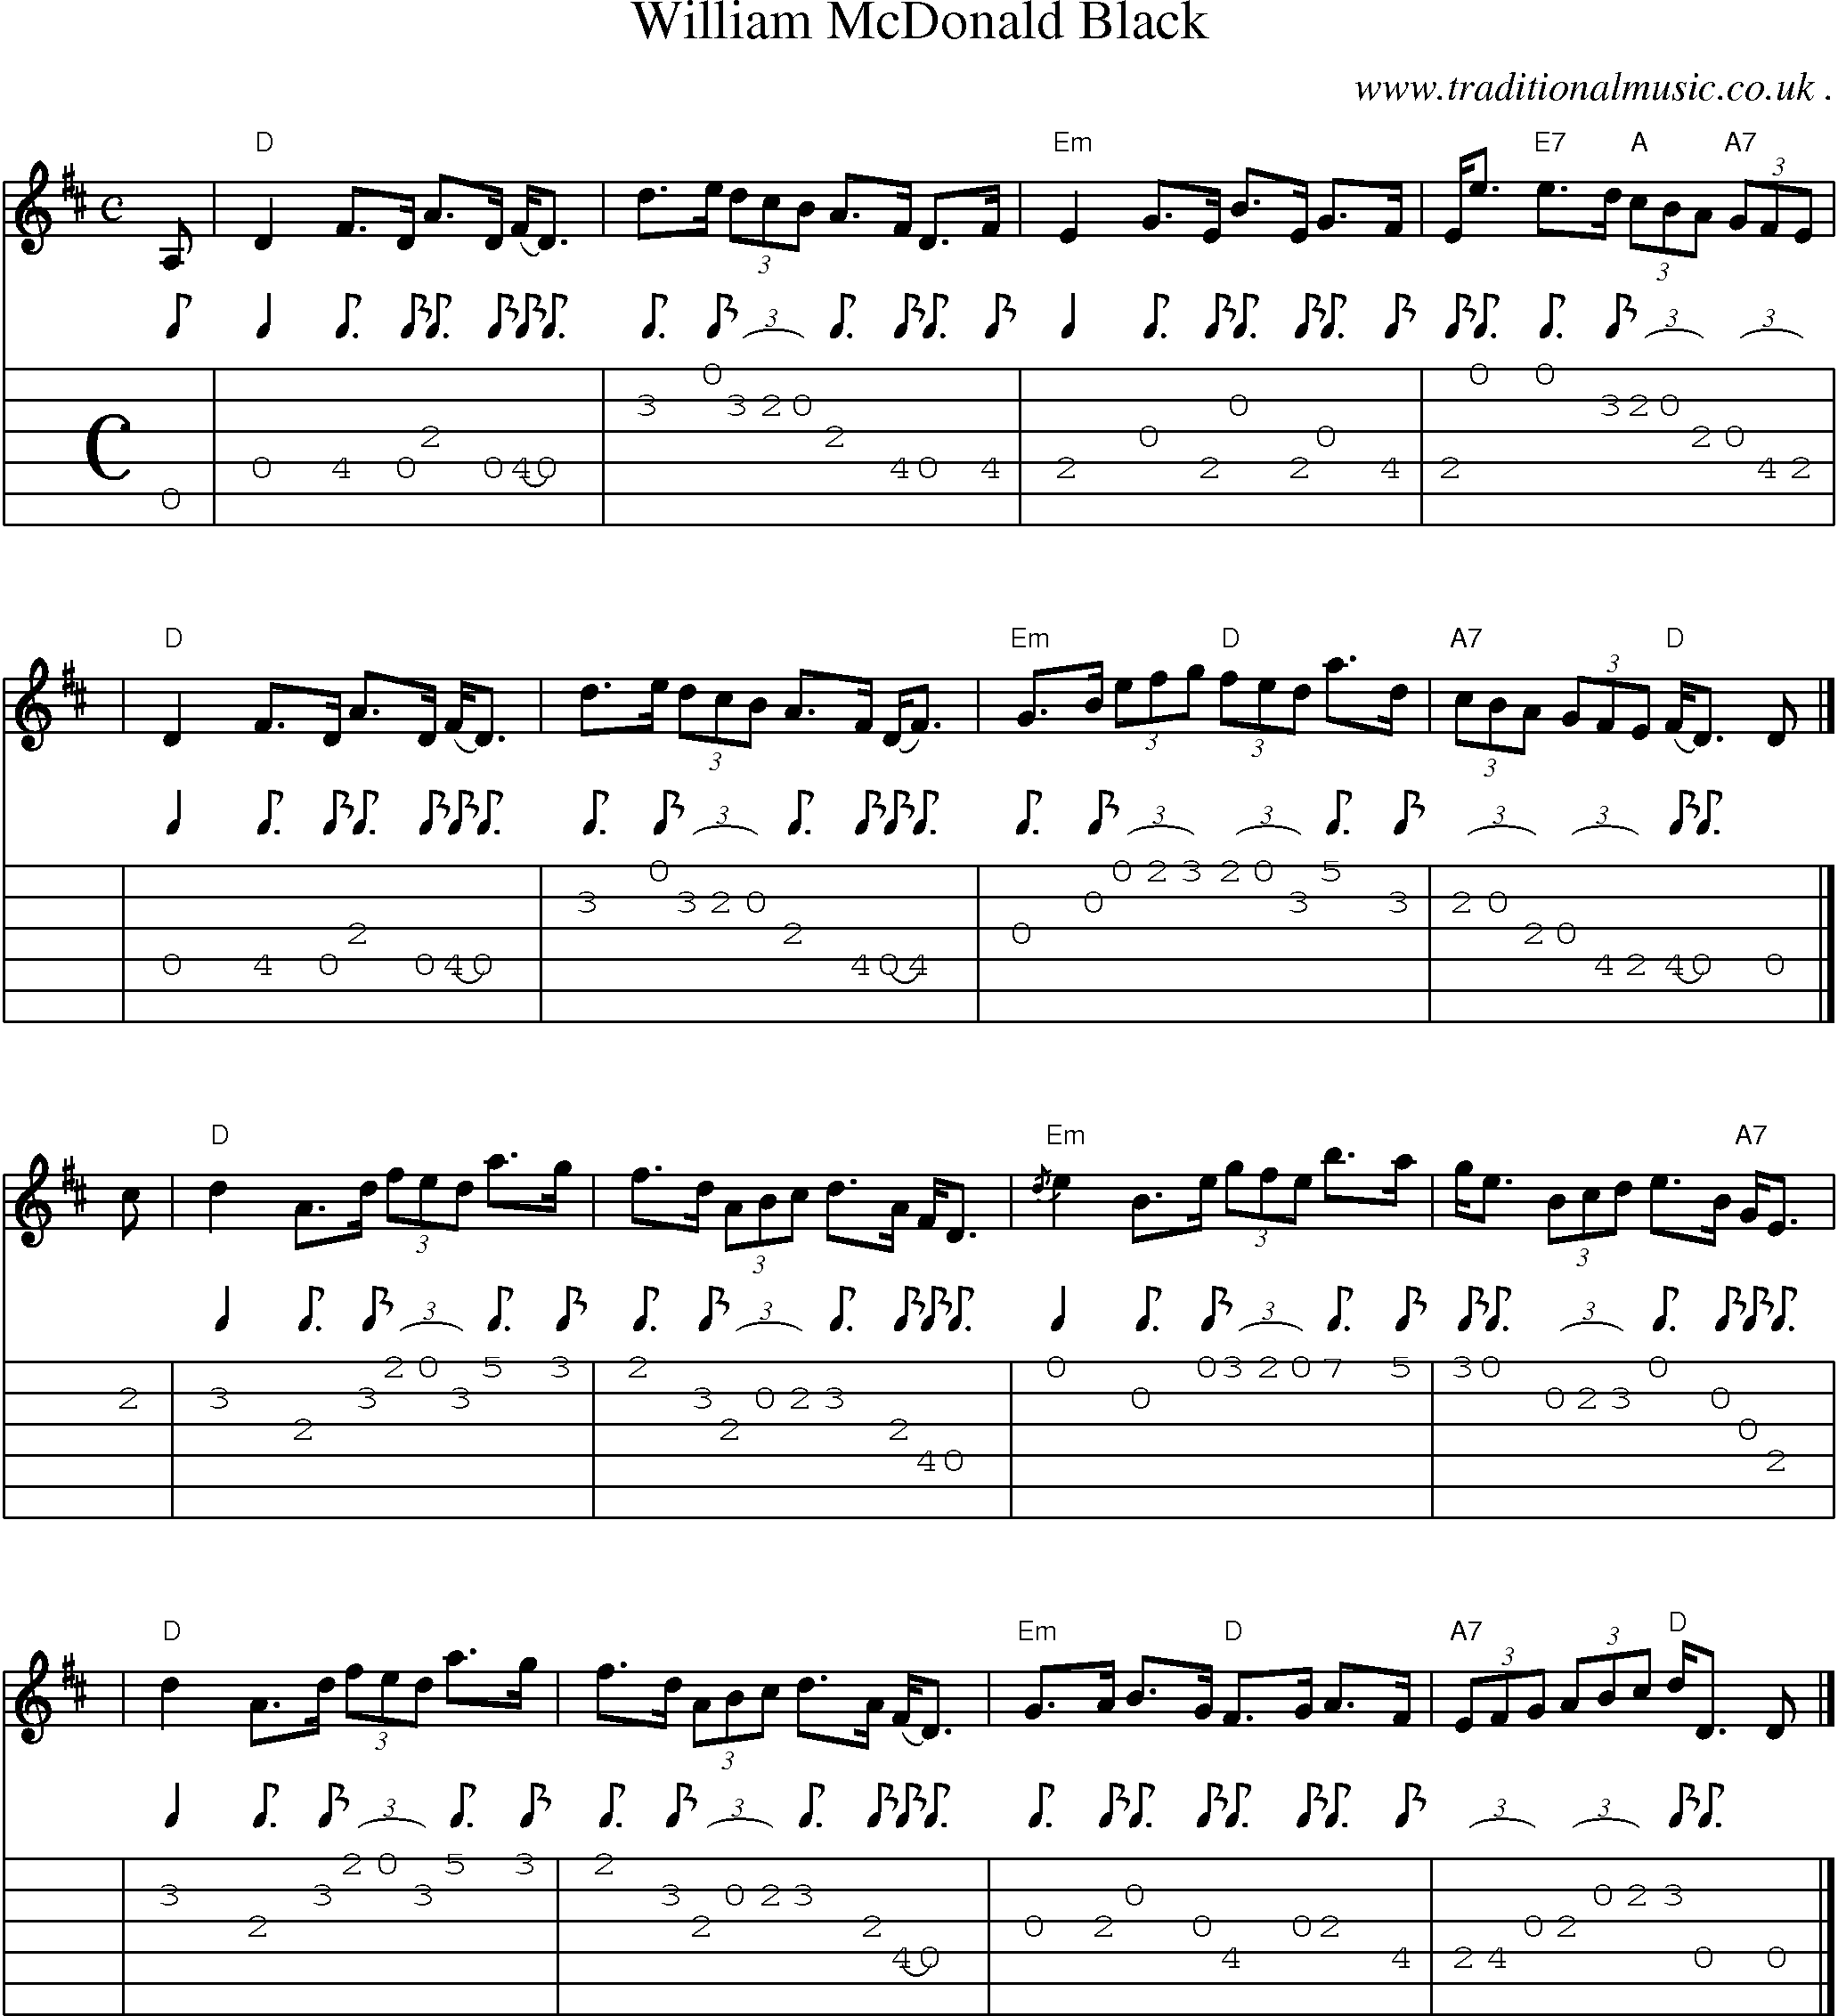 Sheet-music  score, Chords and Guitar Tabs for William Mcdonald Black